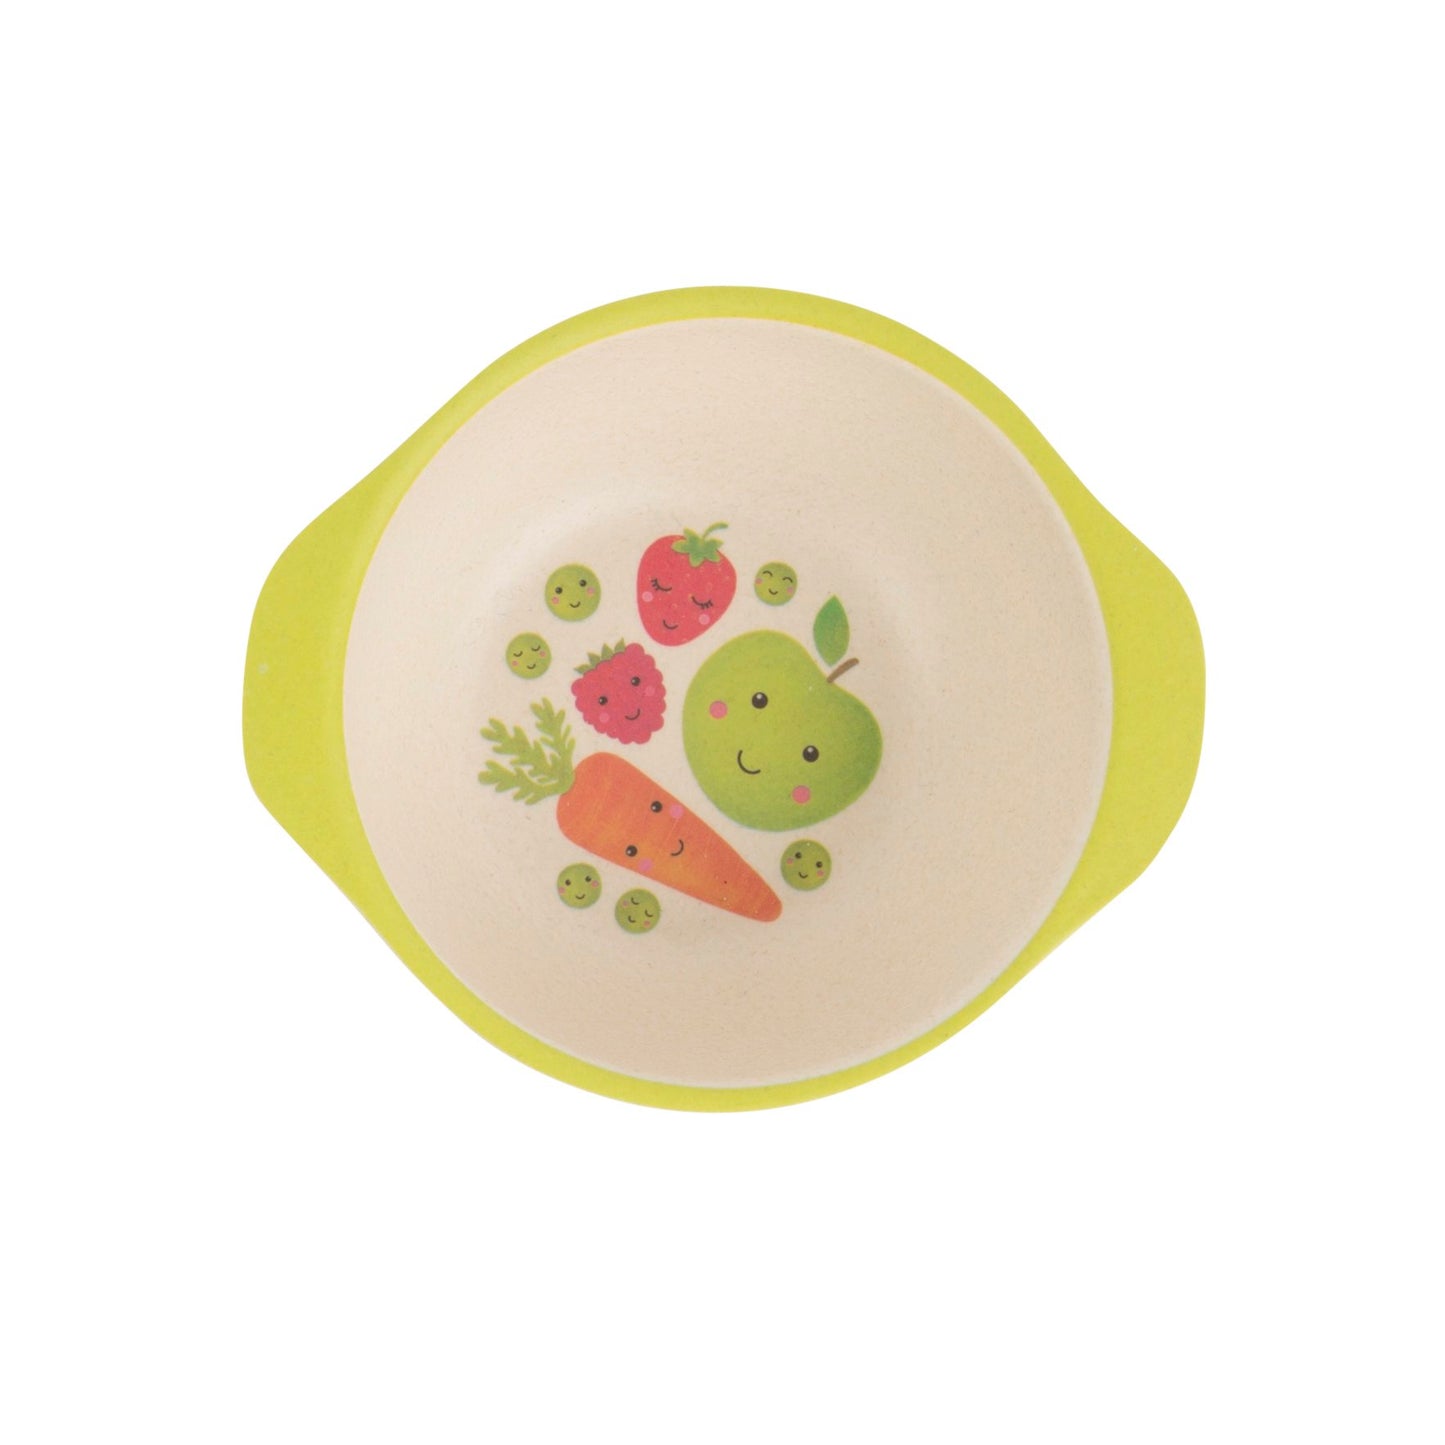 Stay healthy with this bamboo bowl featuring fun vegetable and fruit characters.